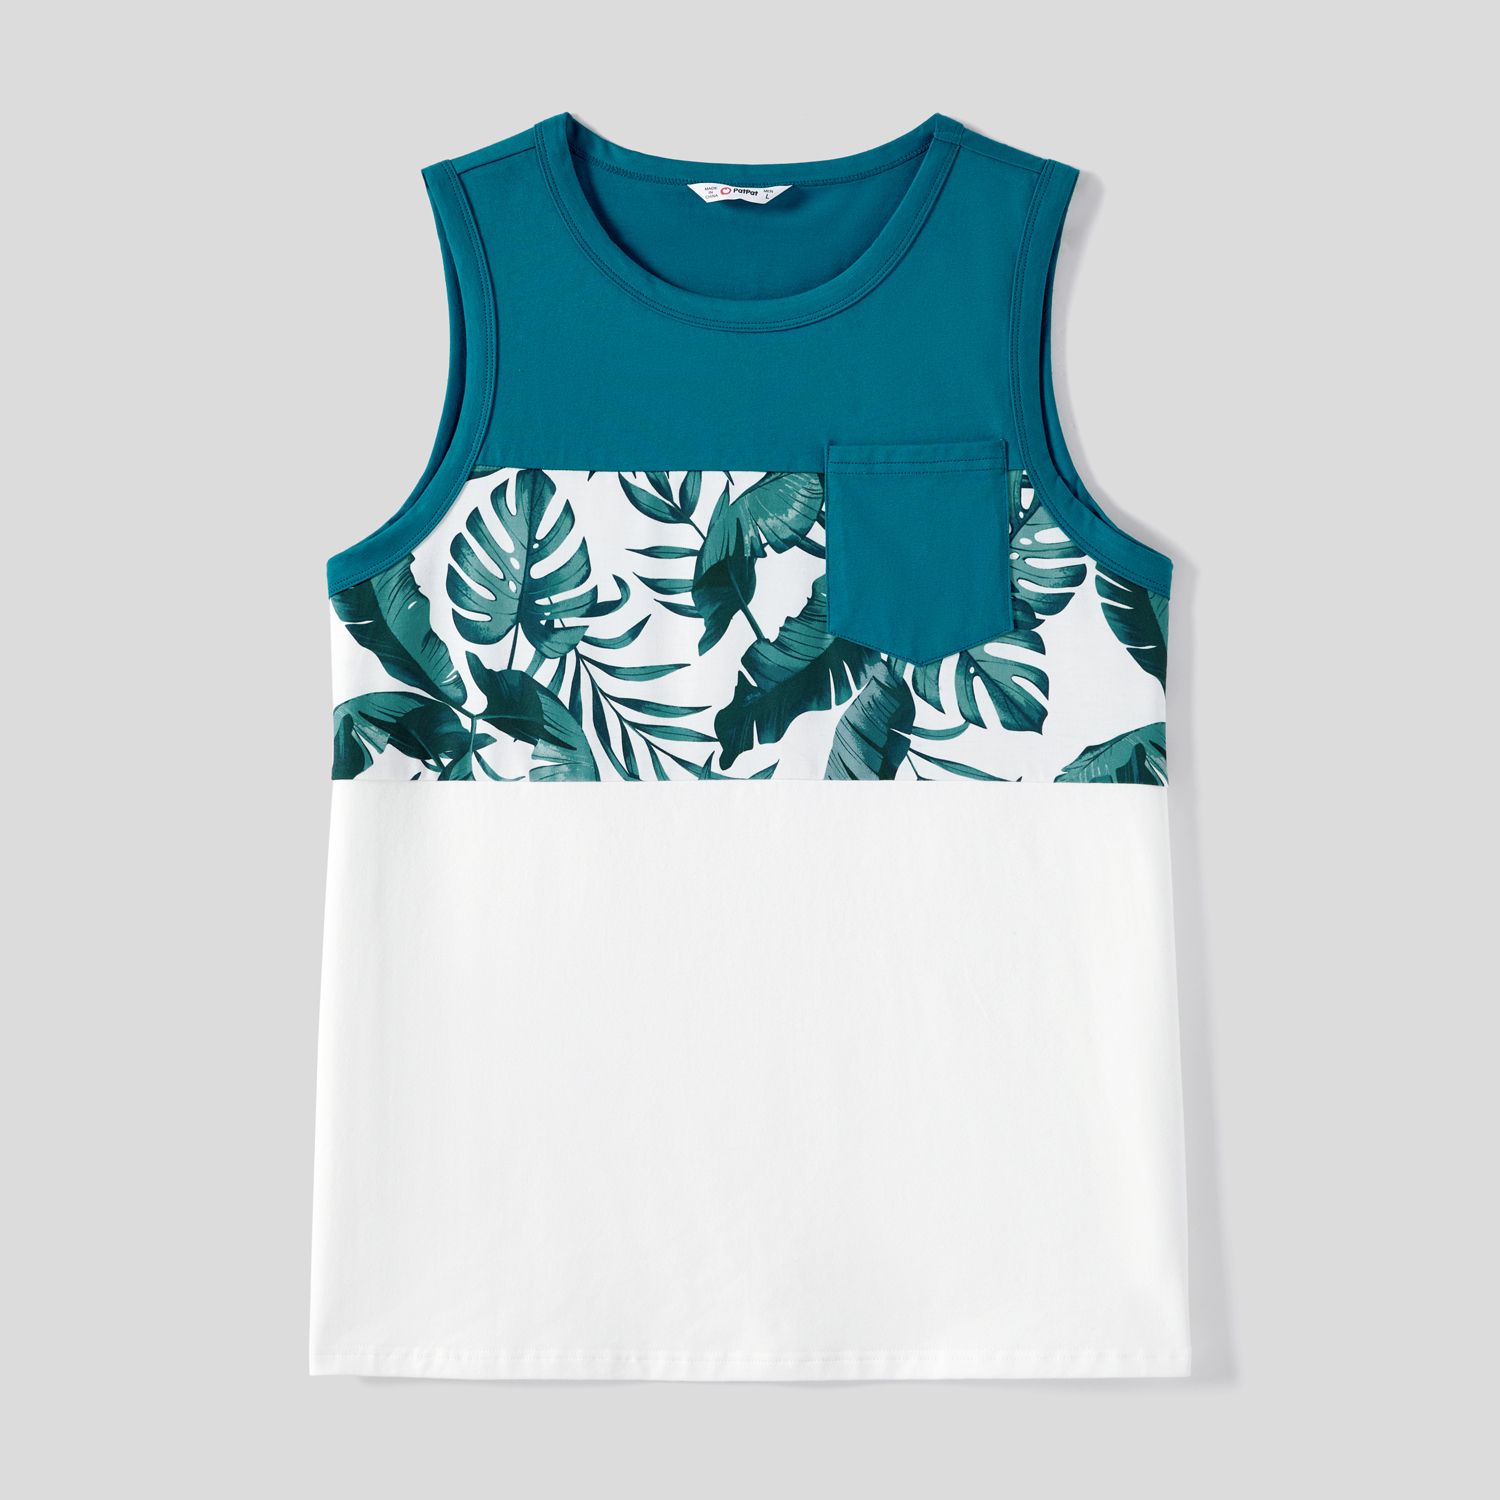 Family Matching Allover Plant Print Short-sleeve Belted Dresses And Patch Pocket Tank Tops Sets